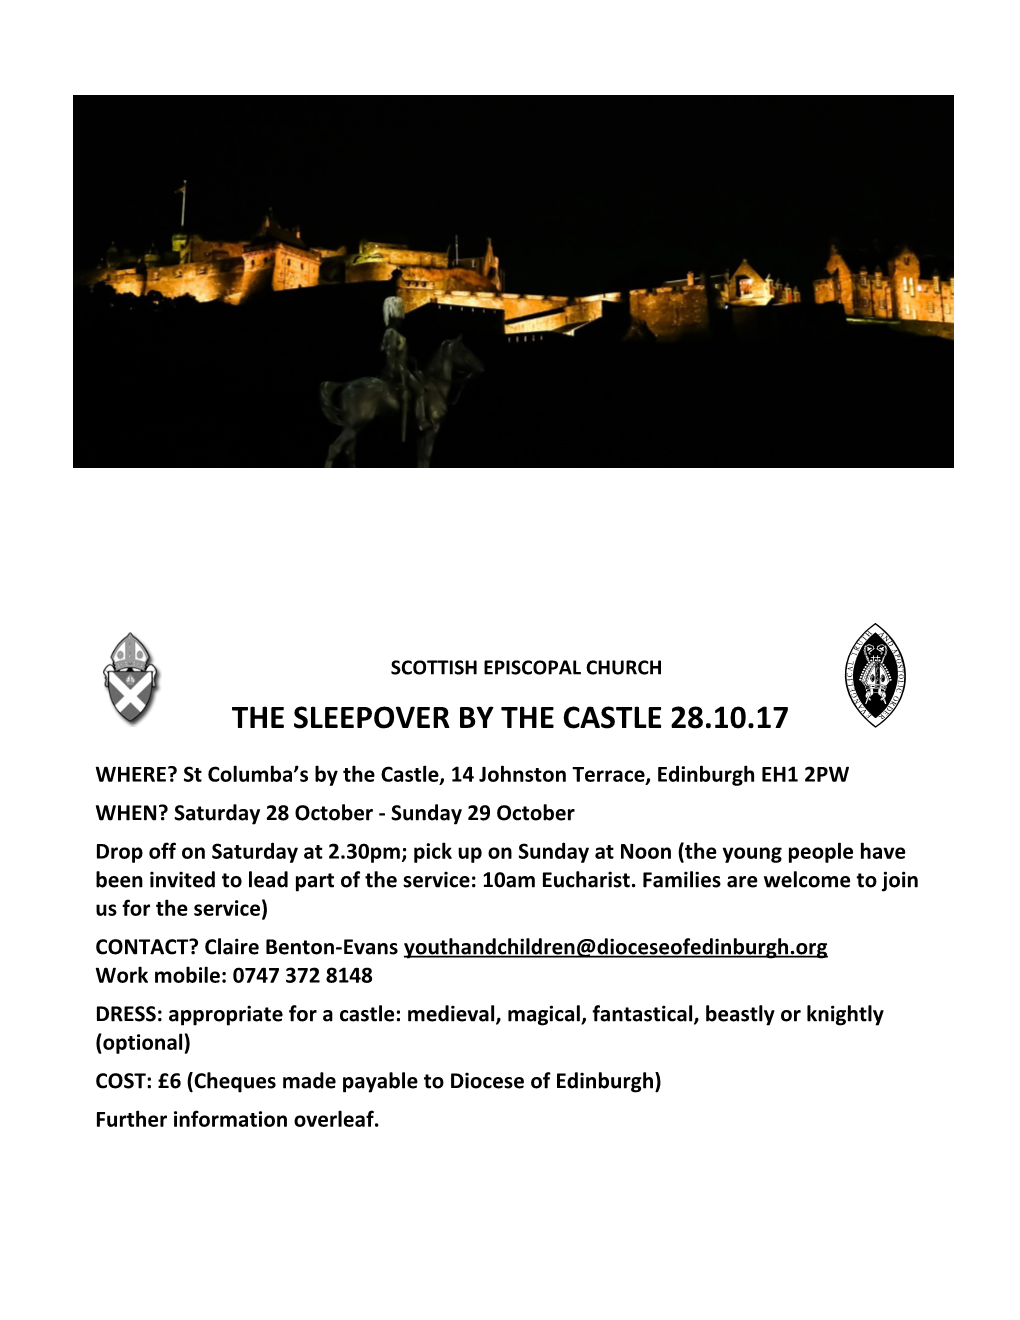 The Sleepover by the Castle 28.10.17